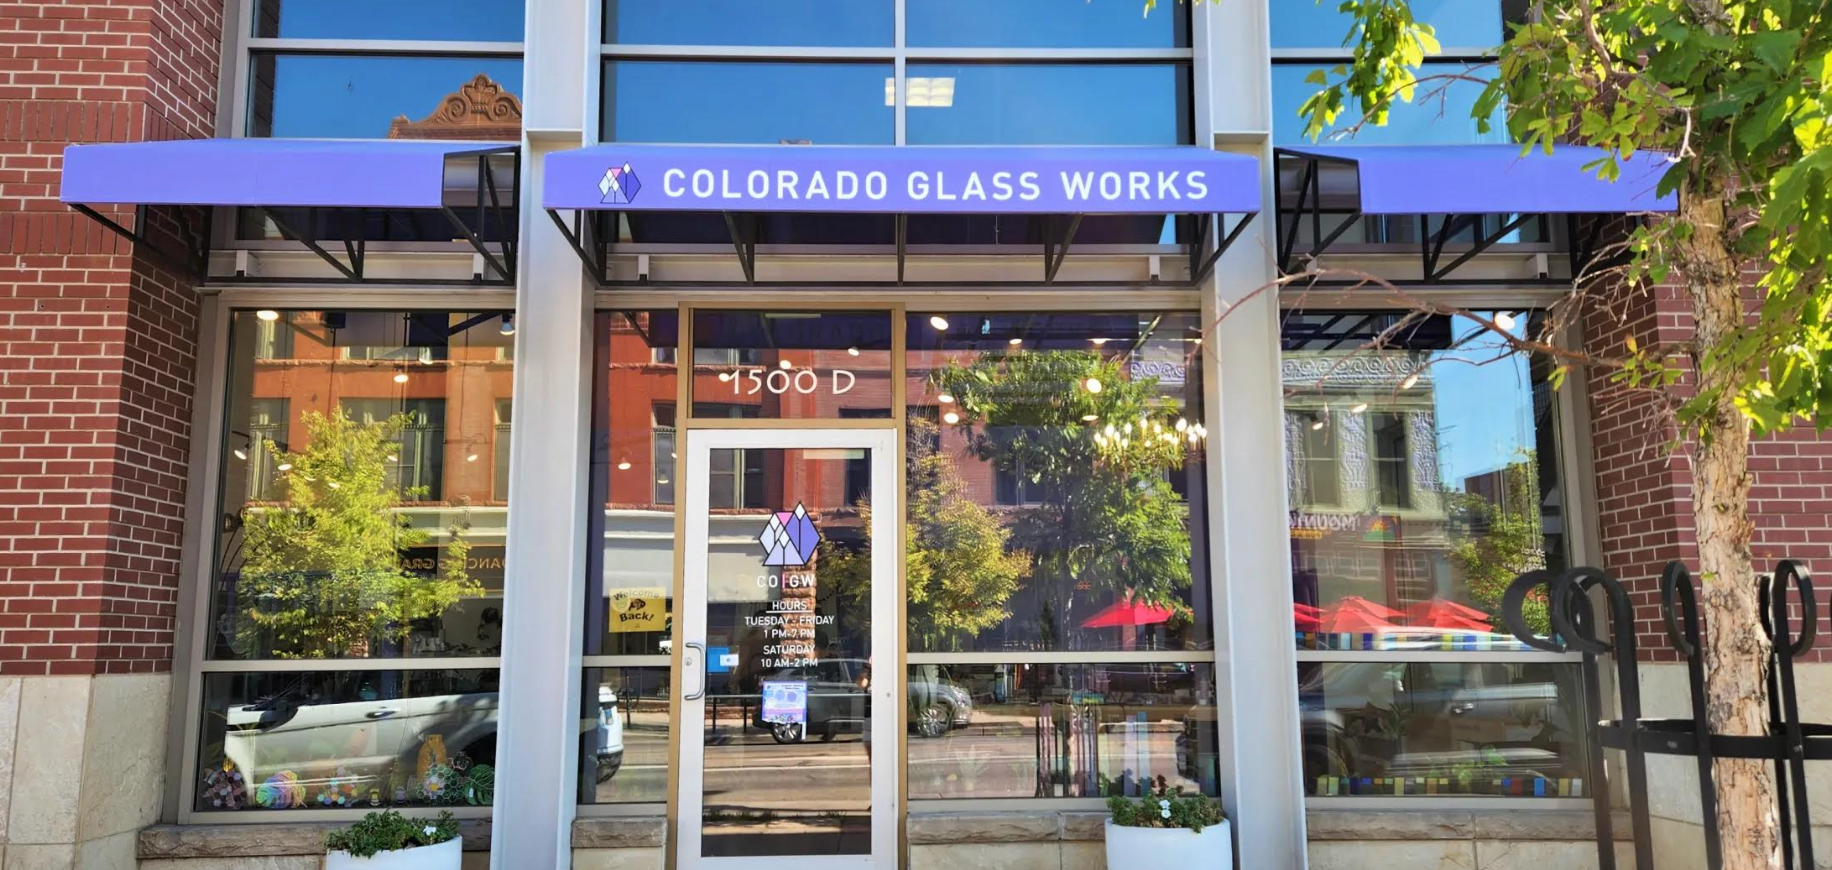 Photo of the front of the pearl street studio for Colorado Glass workshop and store